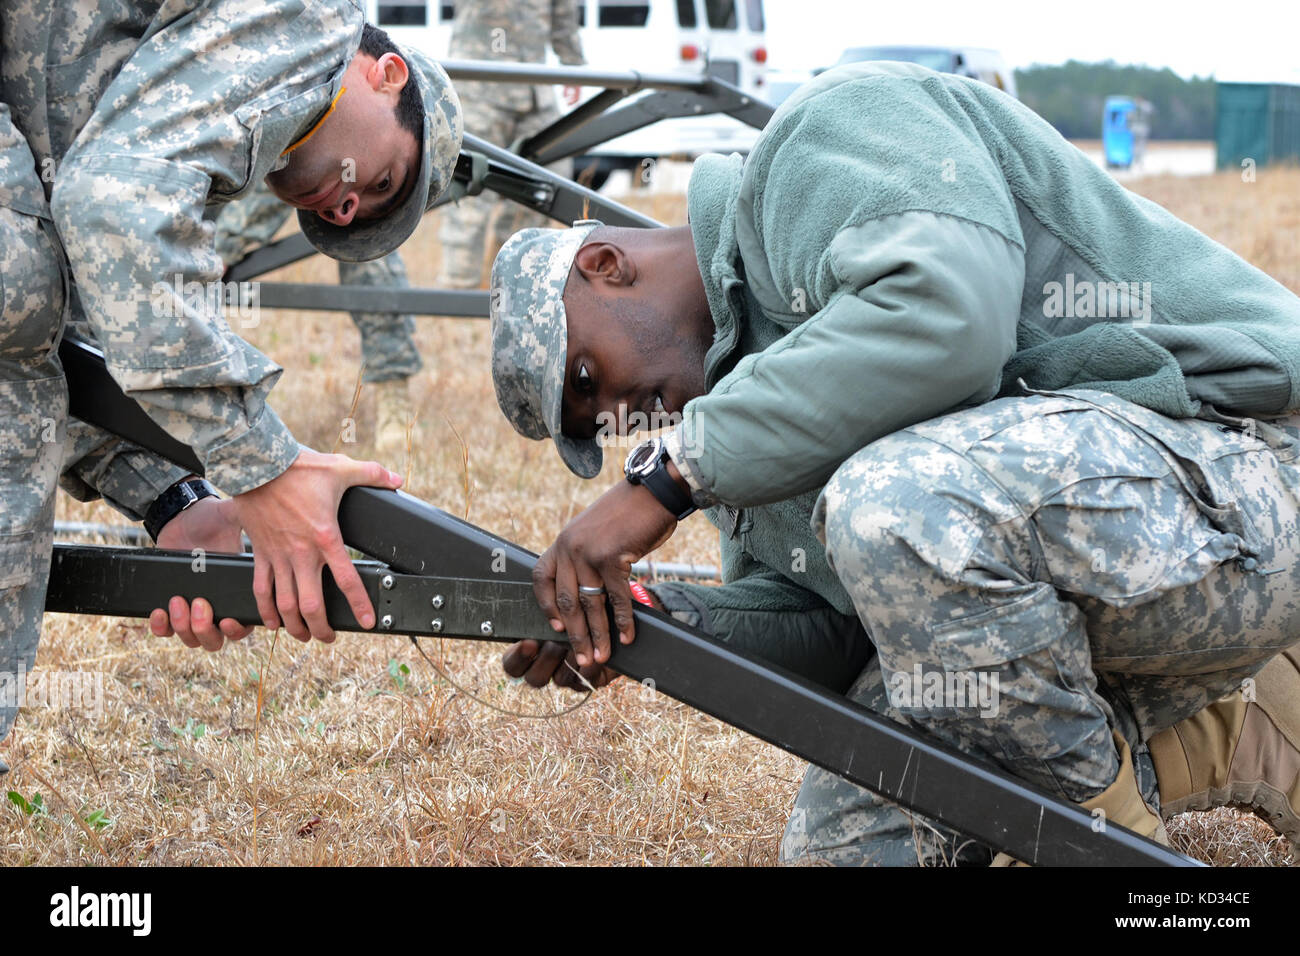 U.S. Army Pvt. Demetrius Fuel, an intel analyst, and Pvt. Peter Brost, an information technology specialist, both assigned to the Headquarters and Headquarters Company  2151, South Carolina Army National Guard, assemble a tent during the Vigilant Guard exercise March 6, 2015, at Georgetown Airport, S.C.  Vigilant Guard is a series of federally funded disaster-response drills conducted by National Guard units working wth federal, state and local emergency management agencies and first responders.  (Air National Guard photo by Airman 1st Class Ashleigh S. Pavelek/Released) Stock Photo